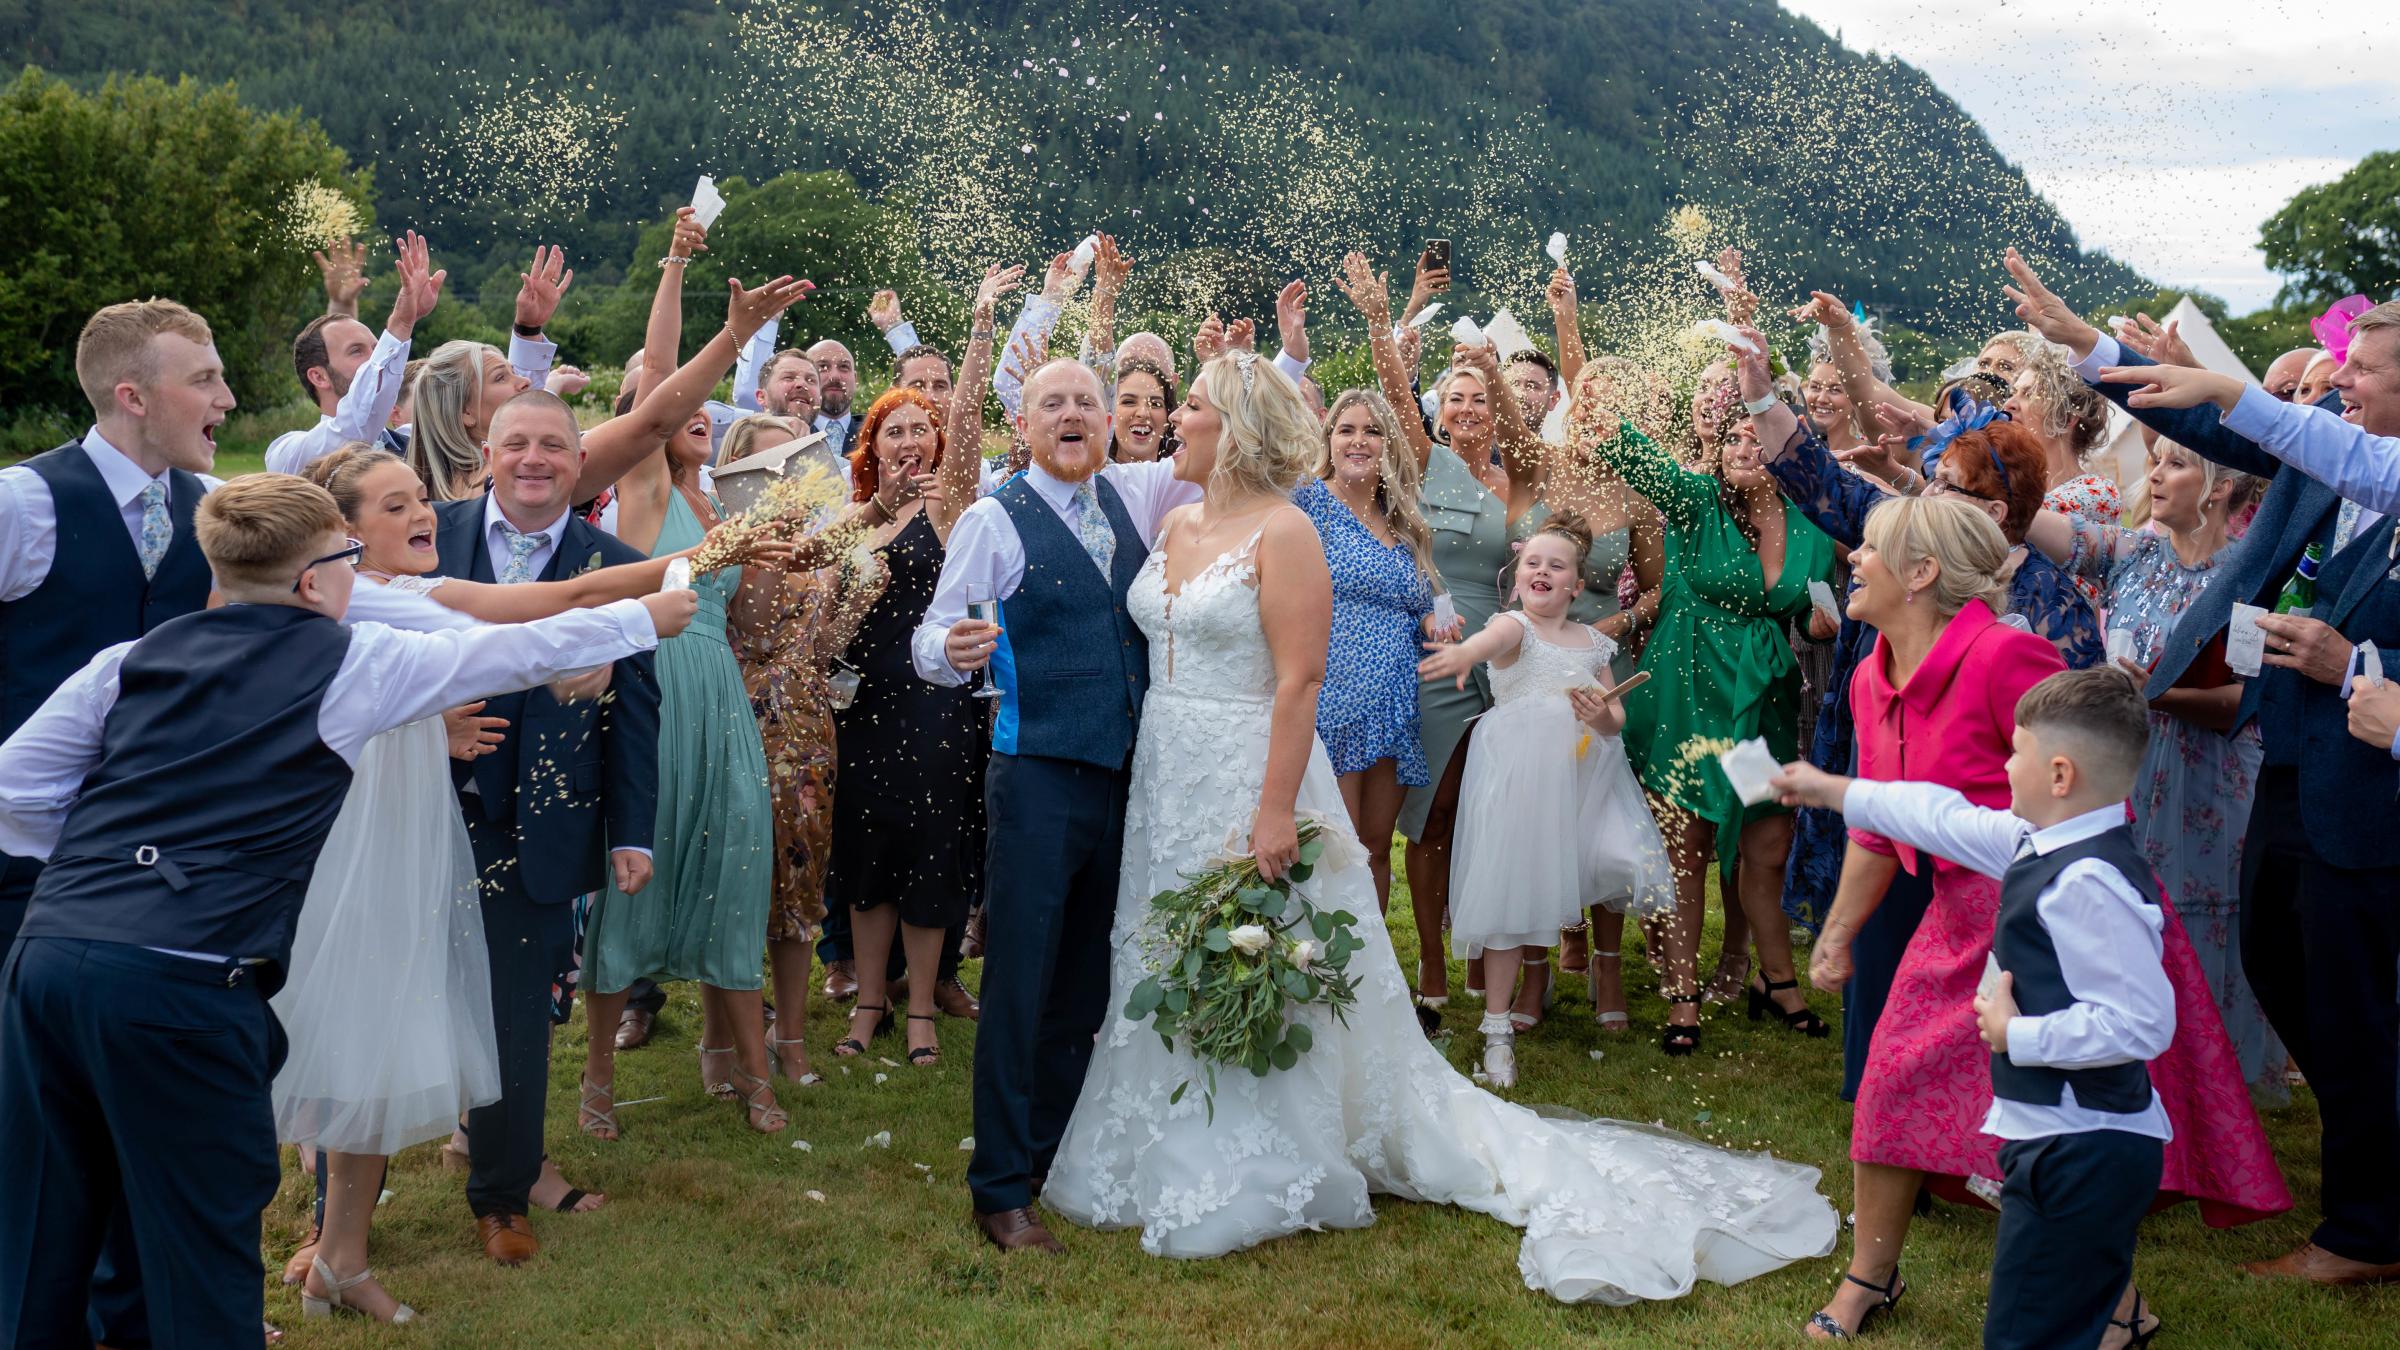 Jess and Deans wedding at Hafod Farm. All photographs: Nathan Roberts Photography